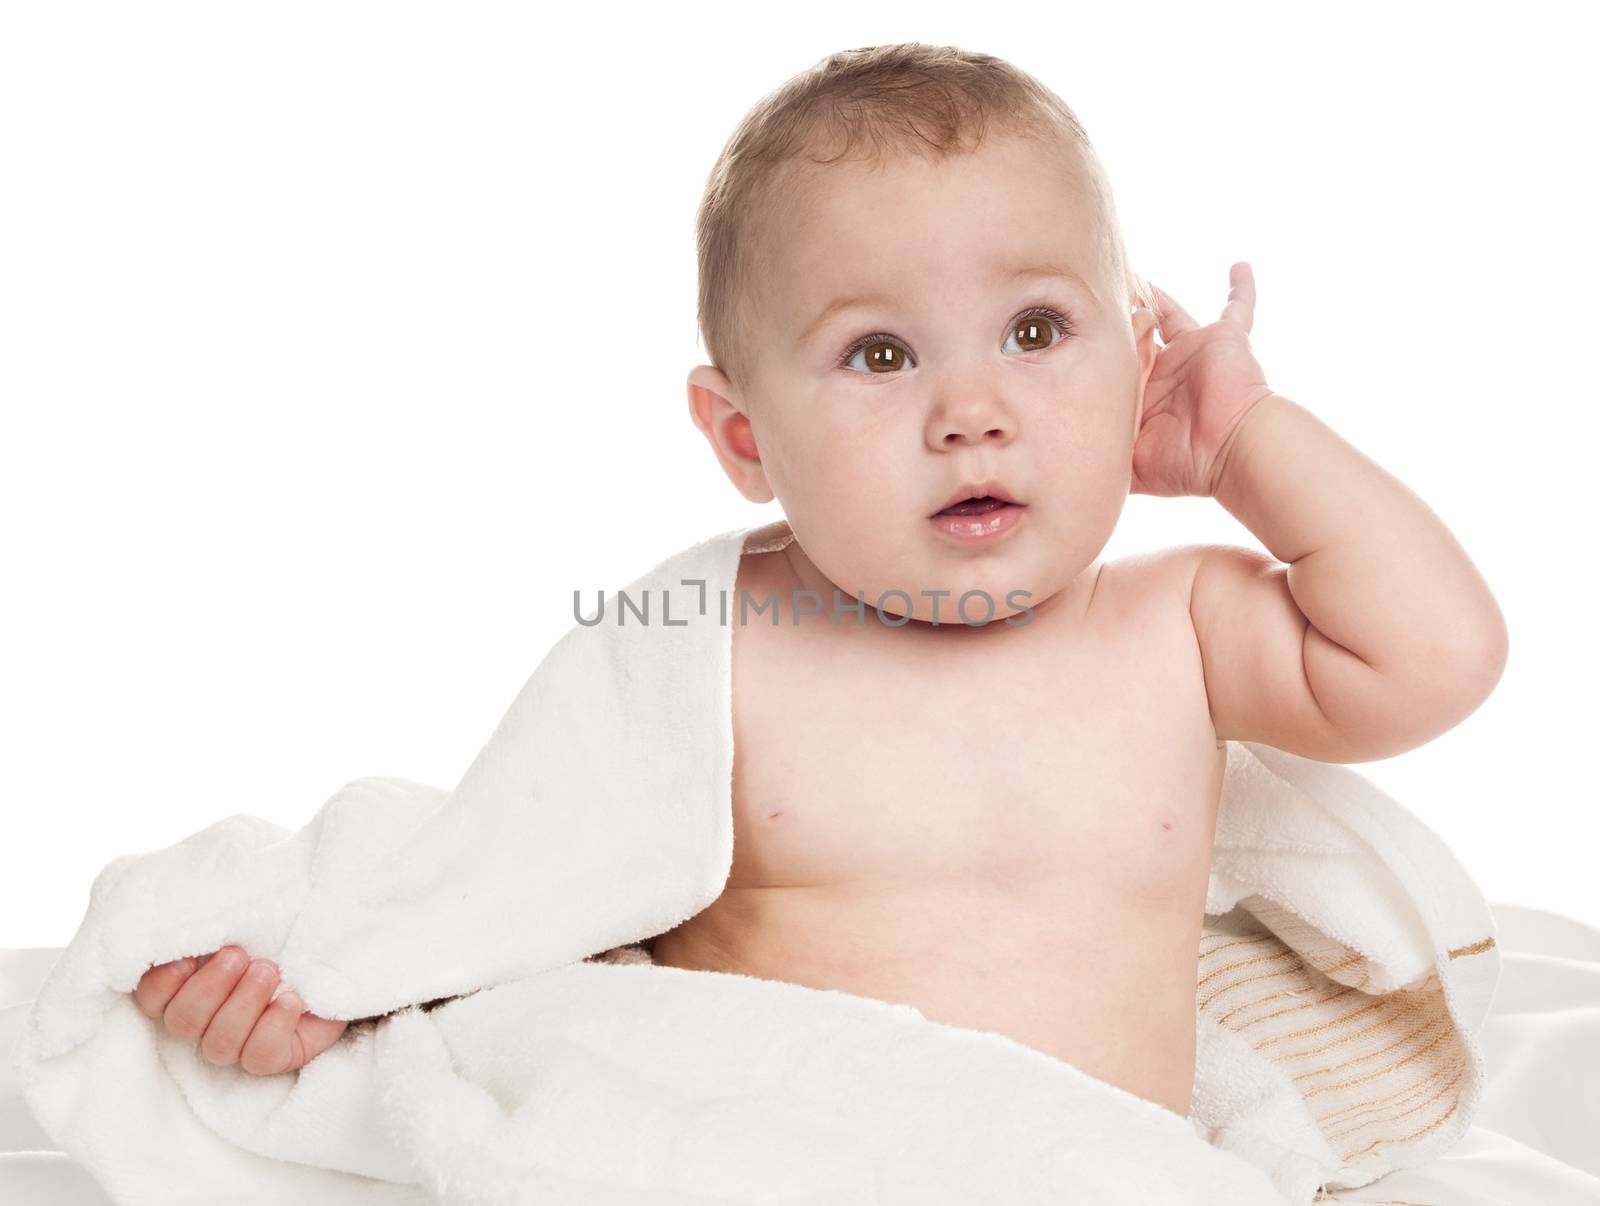 Beautiful child sitting wrapped in towel. Isolated on white background